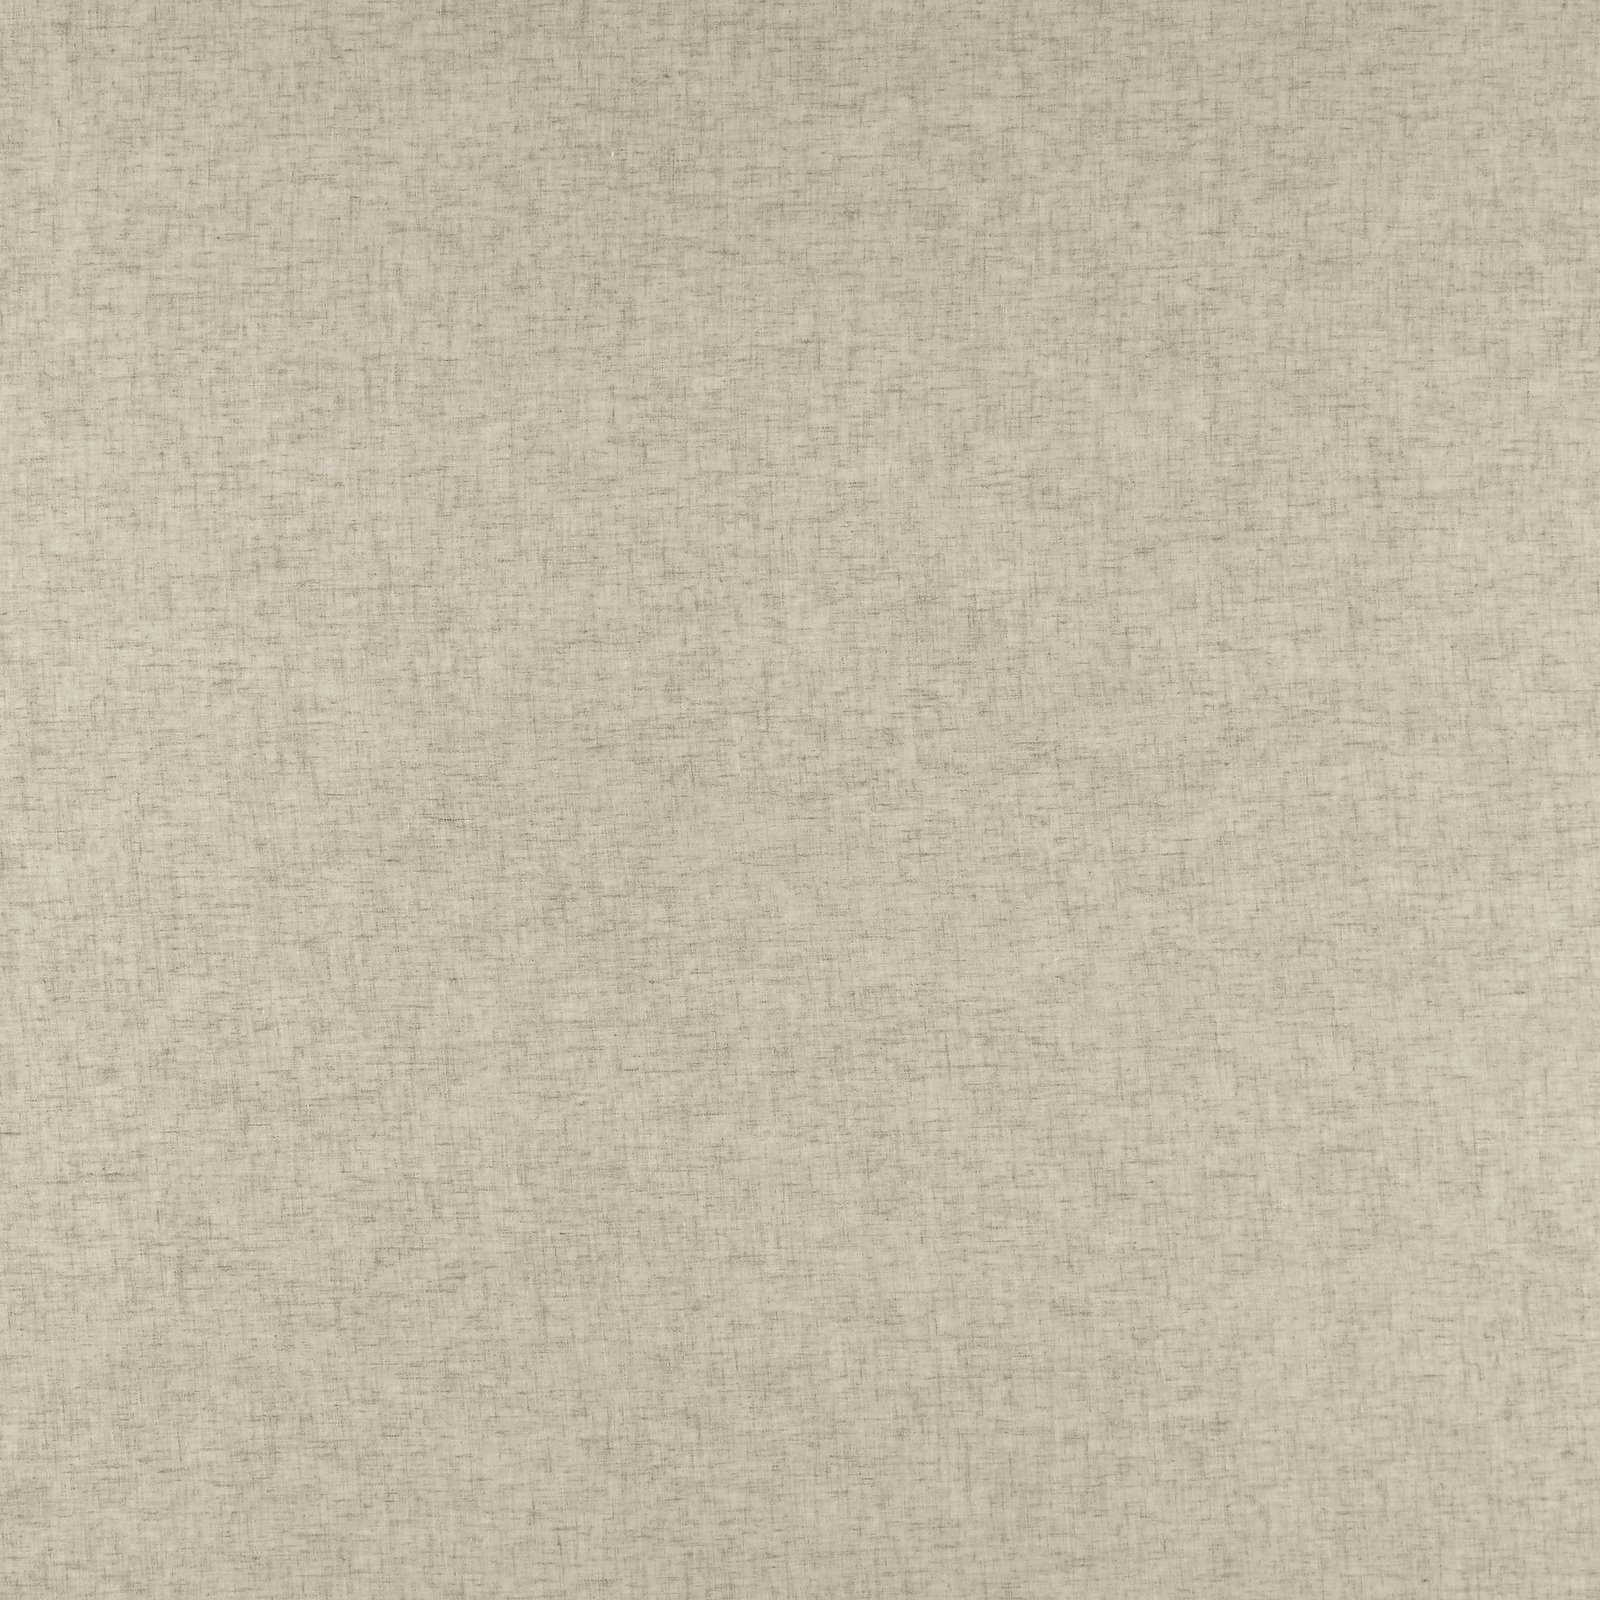 Voile dusty grey polyester/linen blend 835165_pack_solid